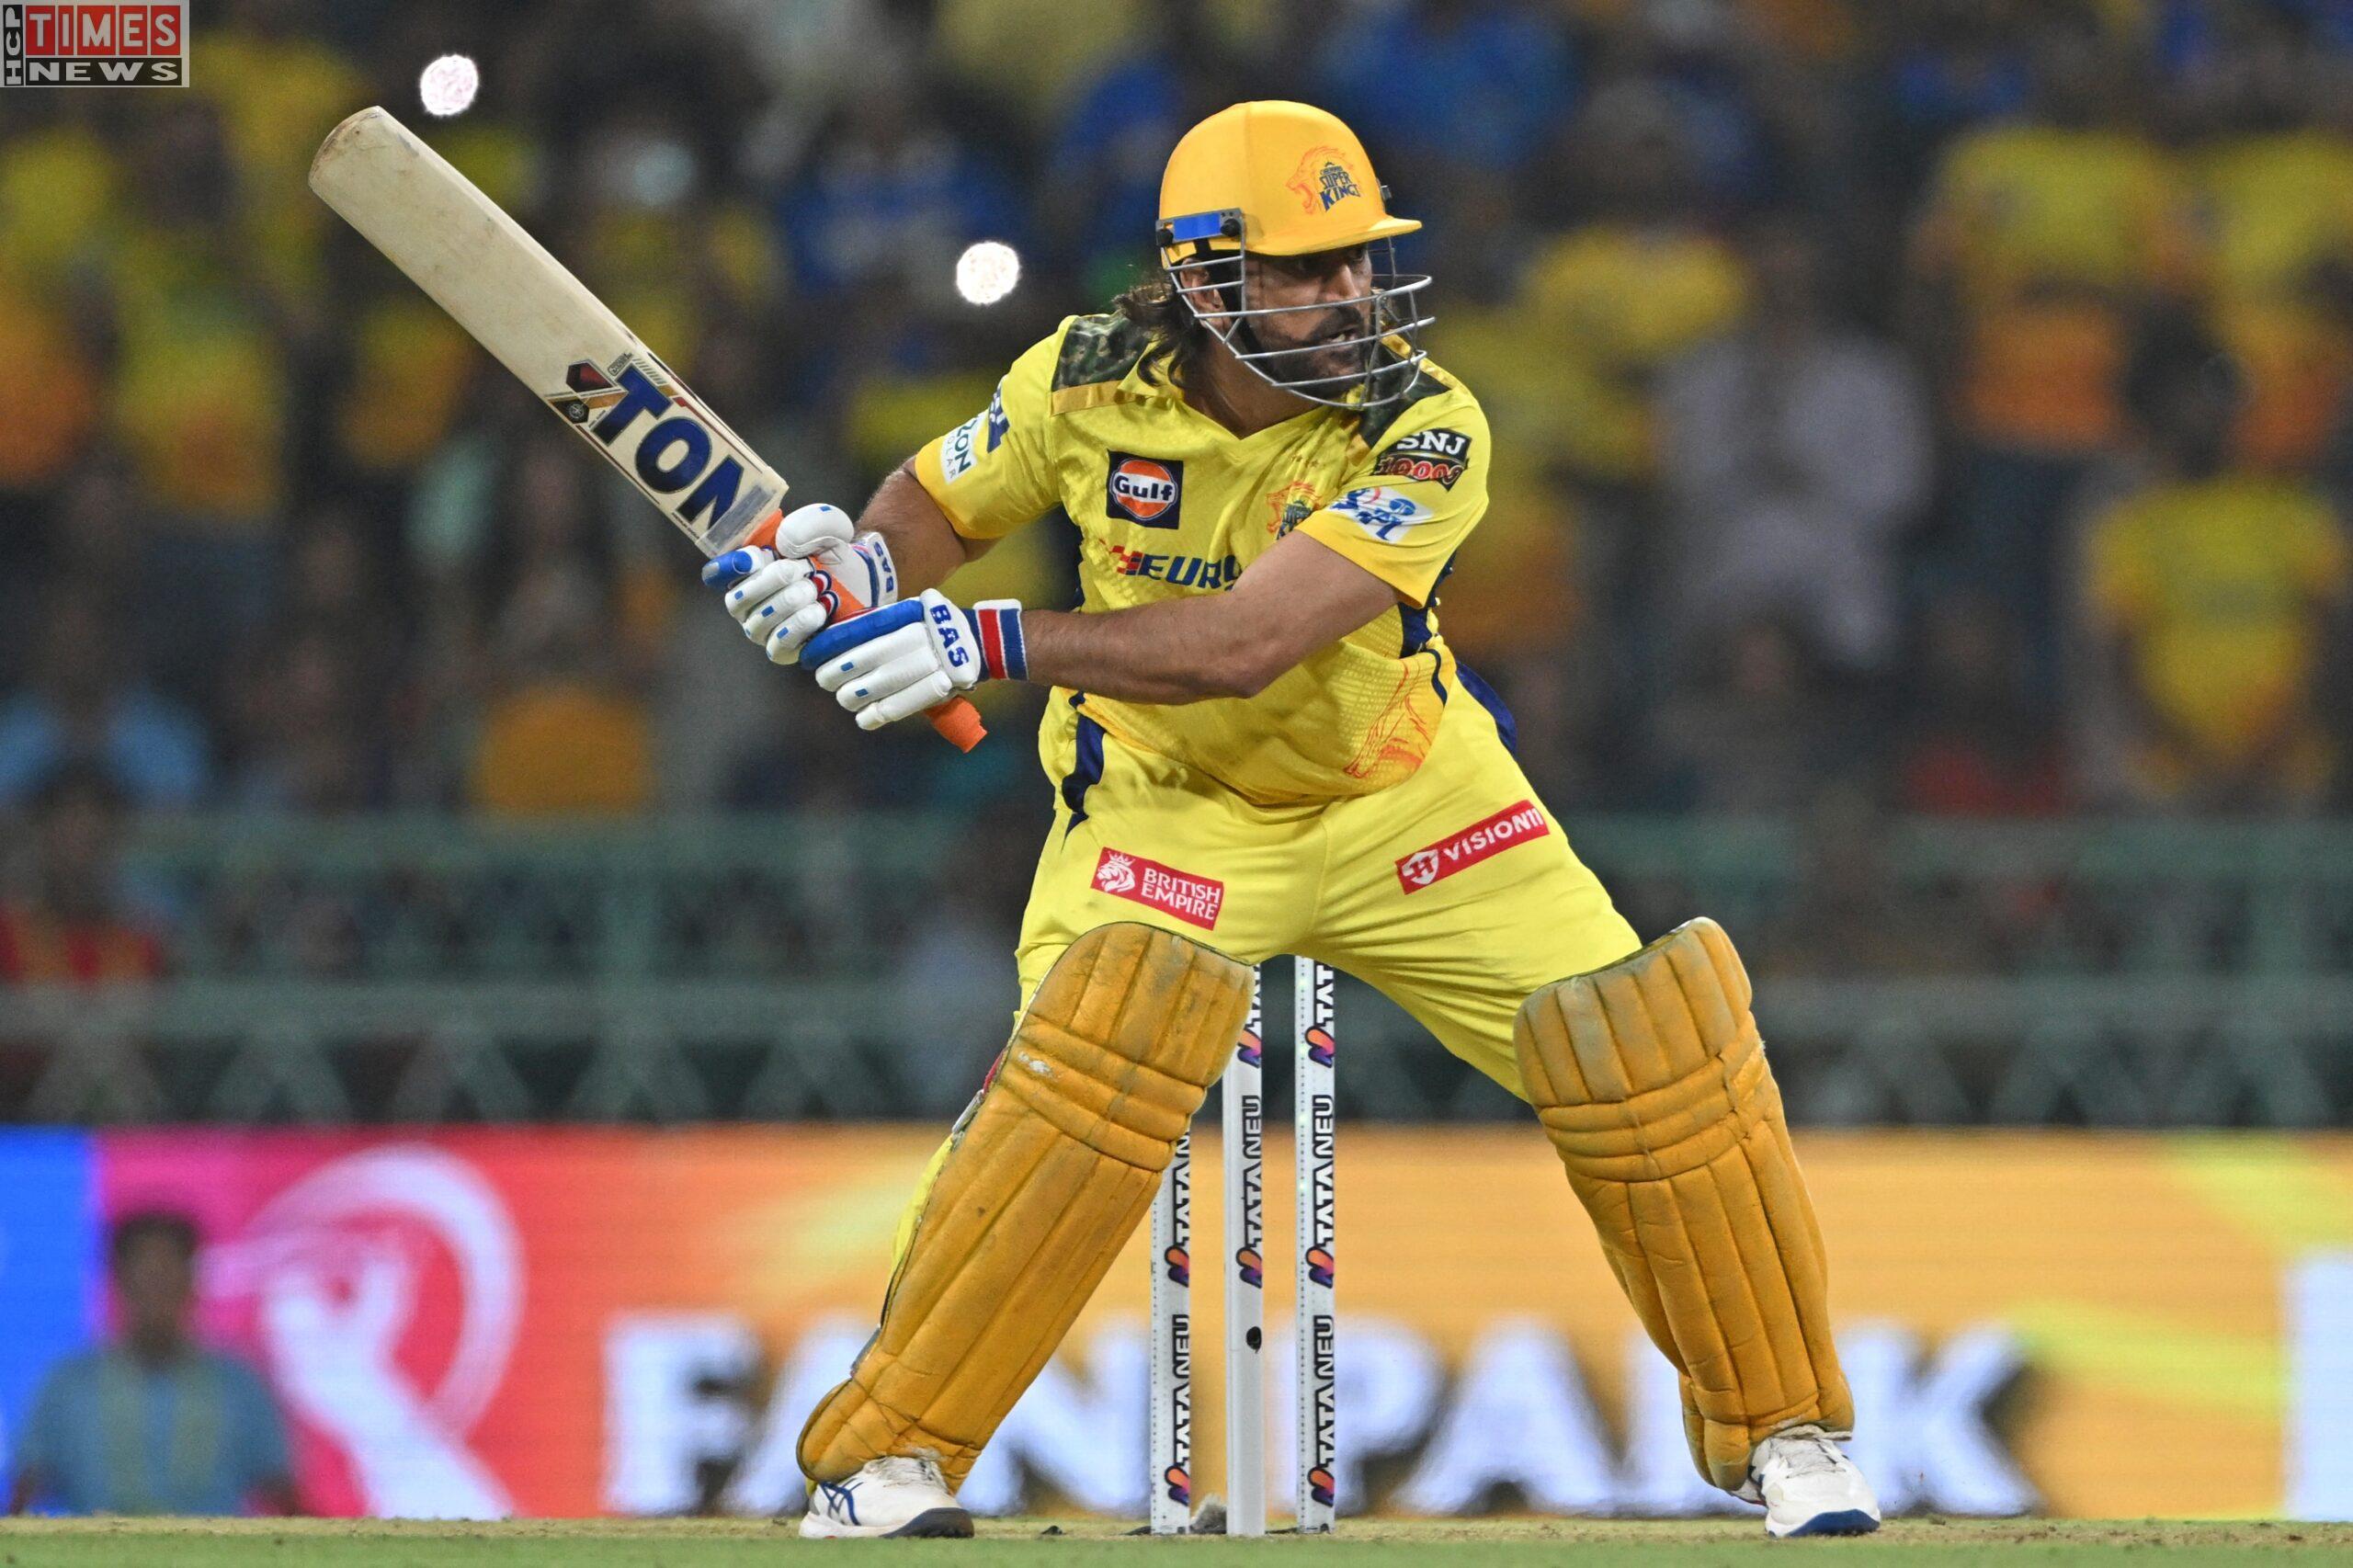 Revealed - Reason Behind MS Dhoni's Limited Batting For CSK Pretty Grim